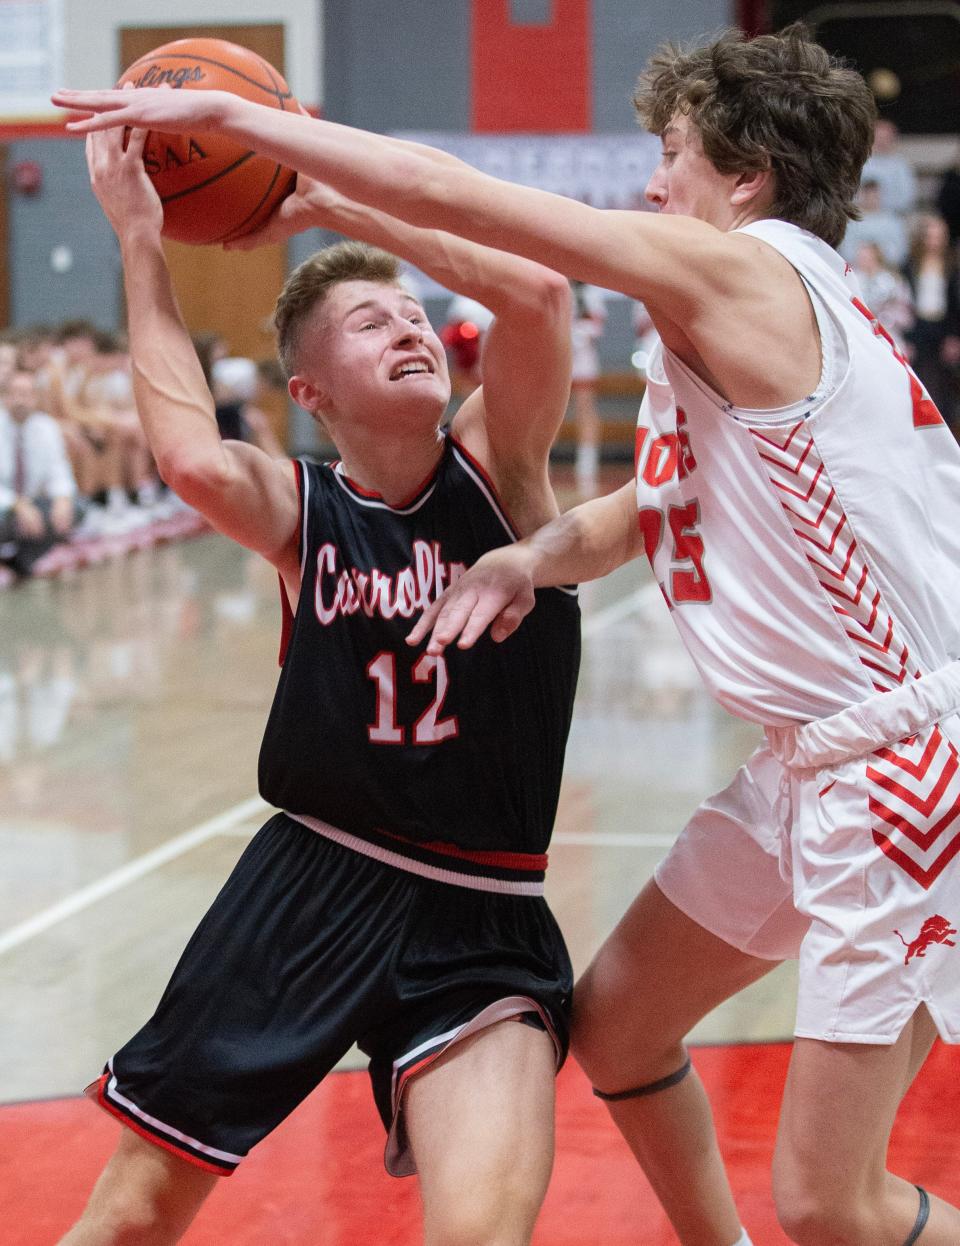 Carrollton's Jaxon Rinkes goes to the hoop with pressure from Minerva's Owen Shick in the second half at Minerva, Friday, Feb. 3, 2023.